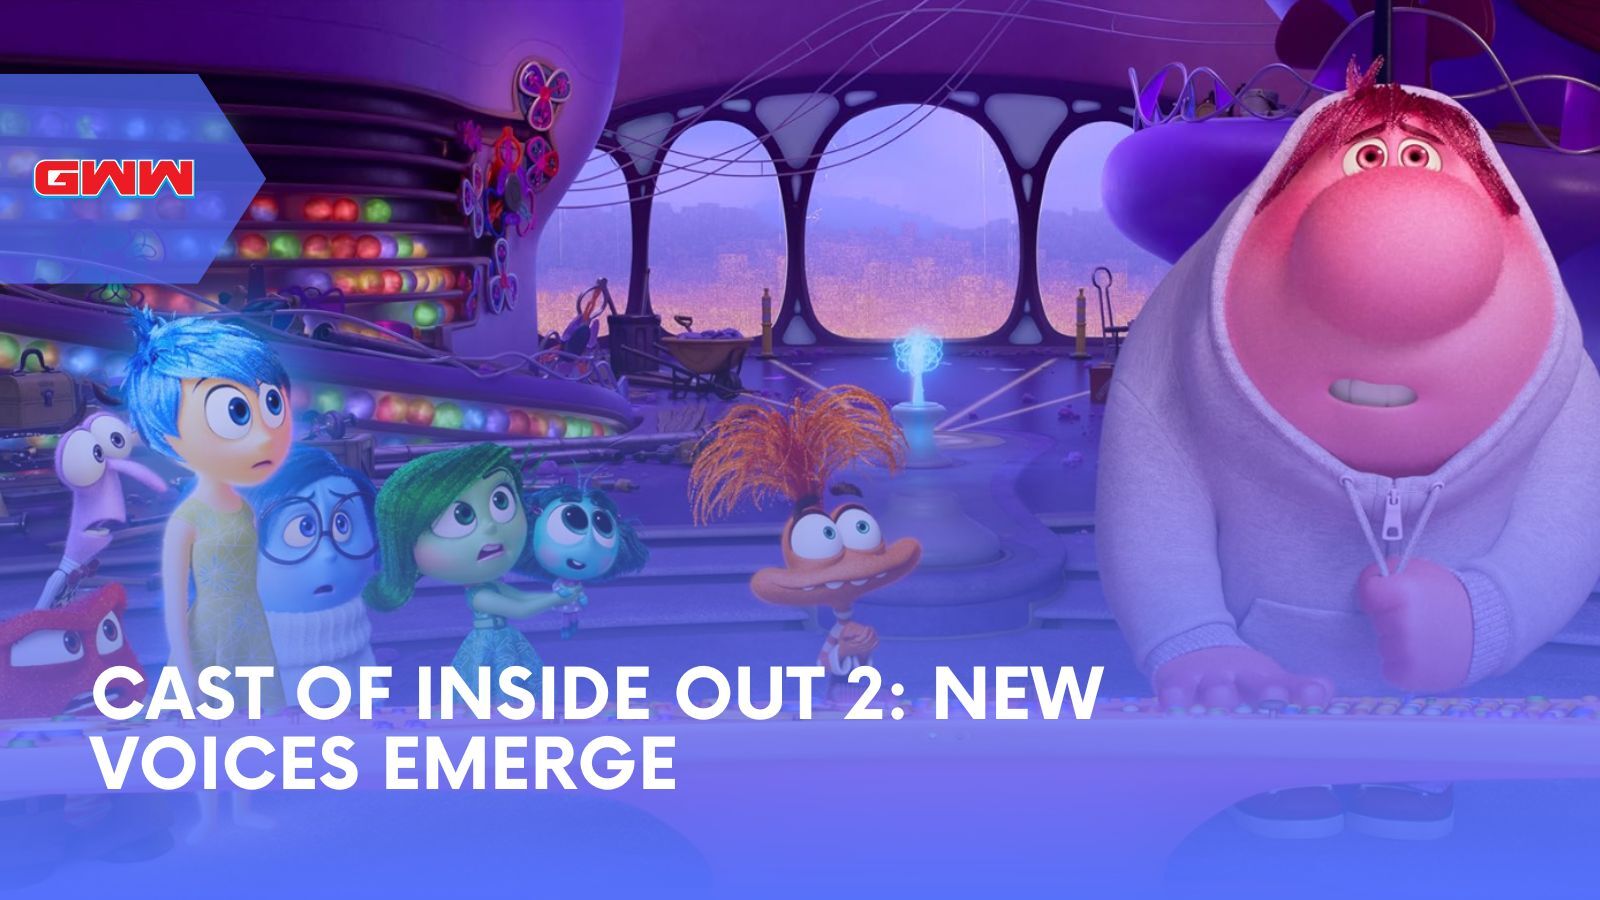 Cast of Inside Out 2: New Voices Emerge